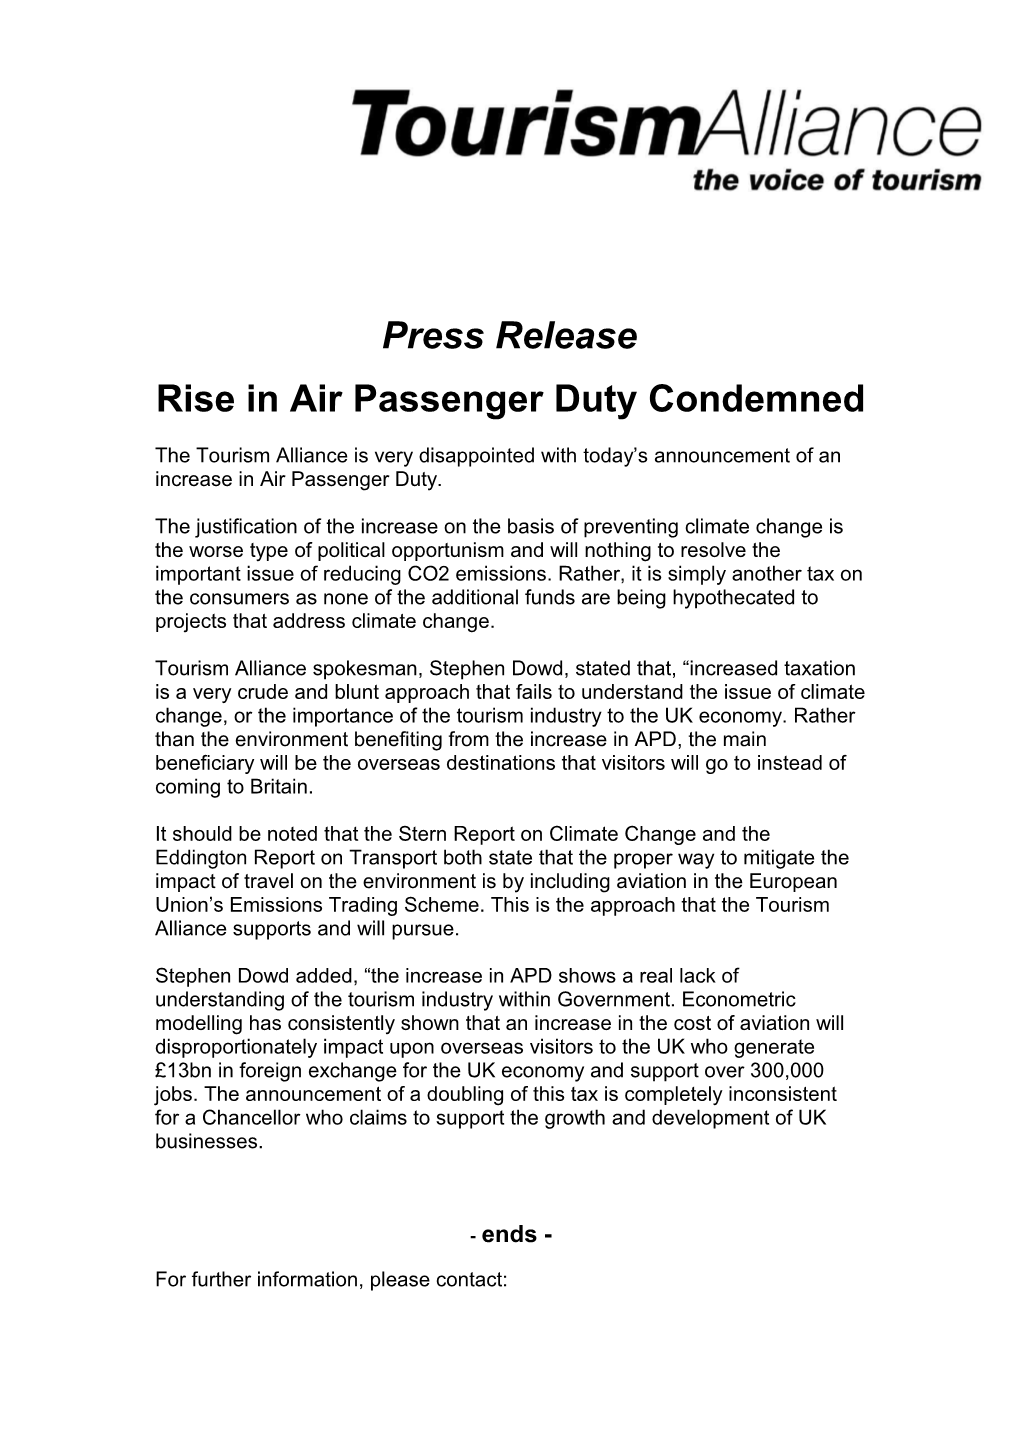 Rise in Air Passenger Duty Condemned